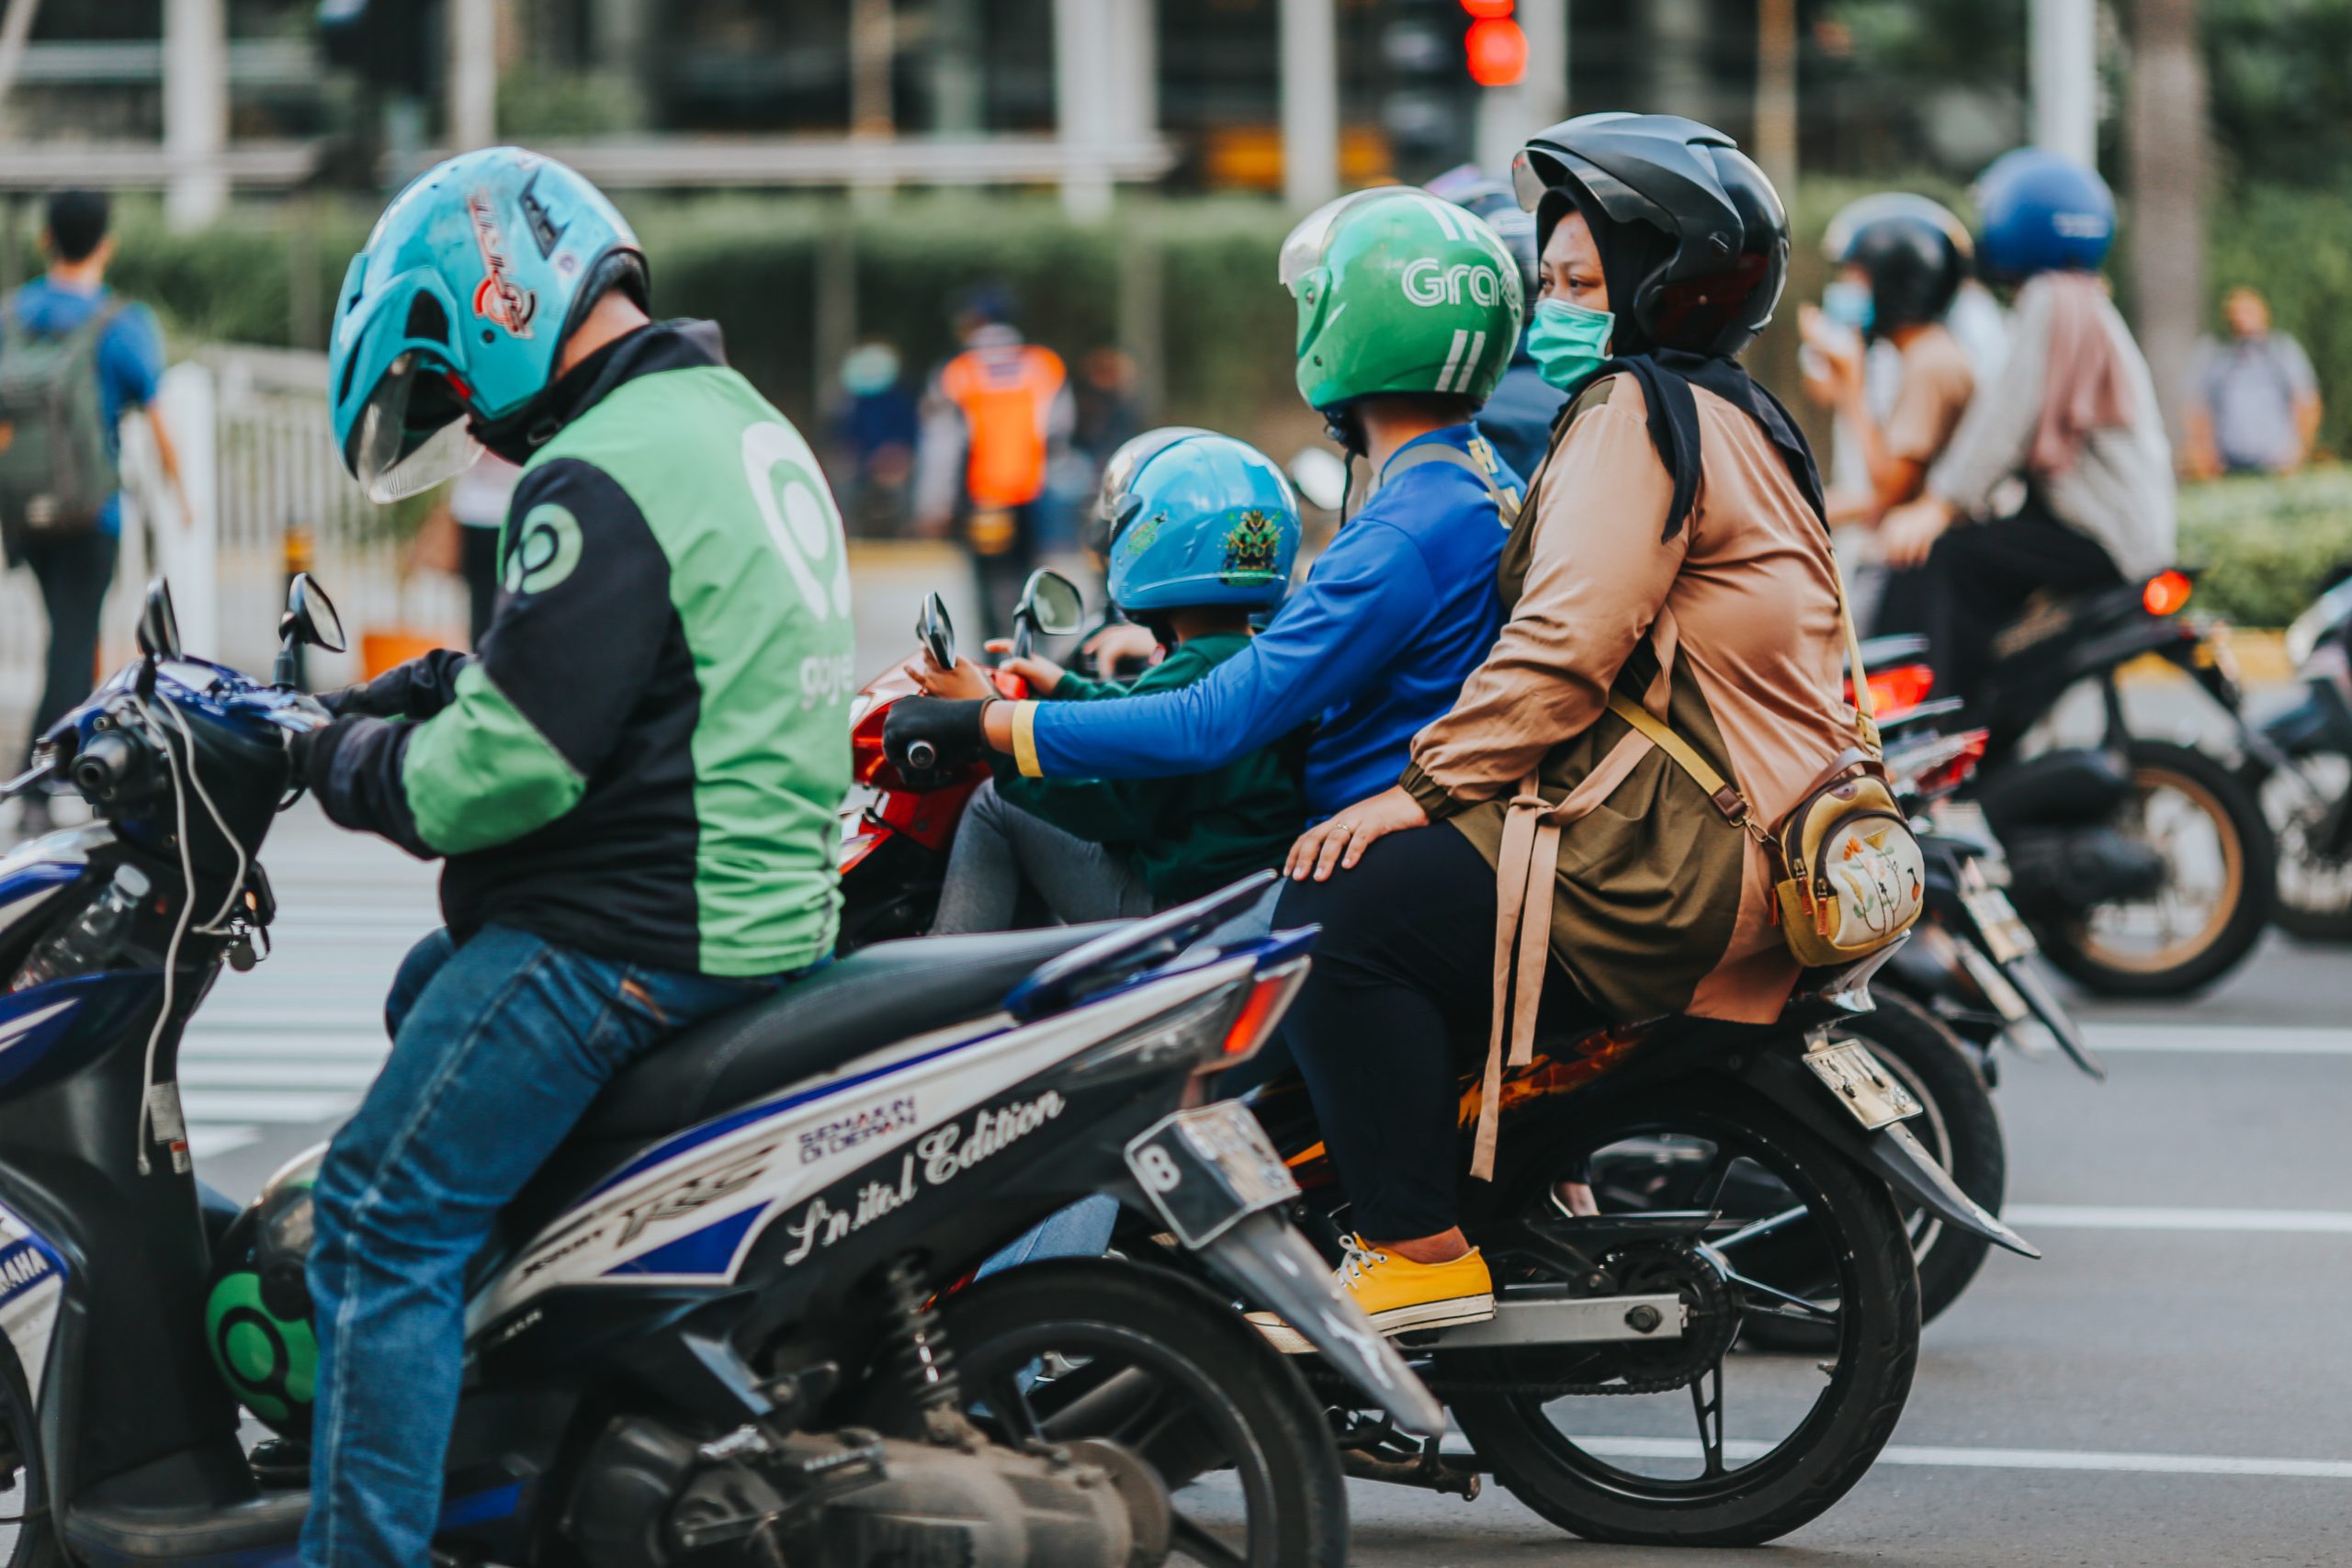 Why Are Left-Turn Accidents So Dangerous For Motorcyclists?